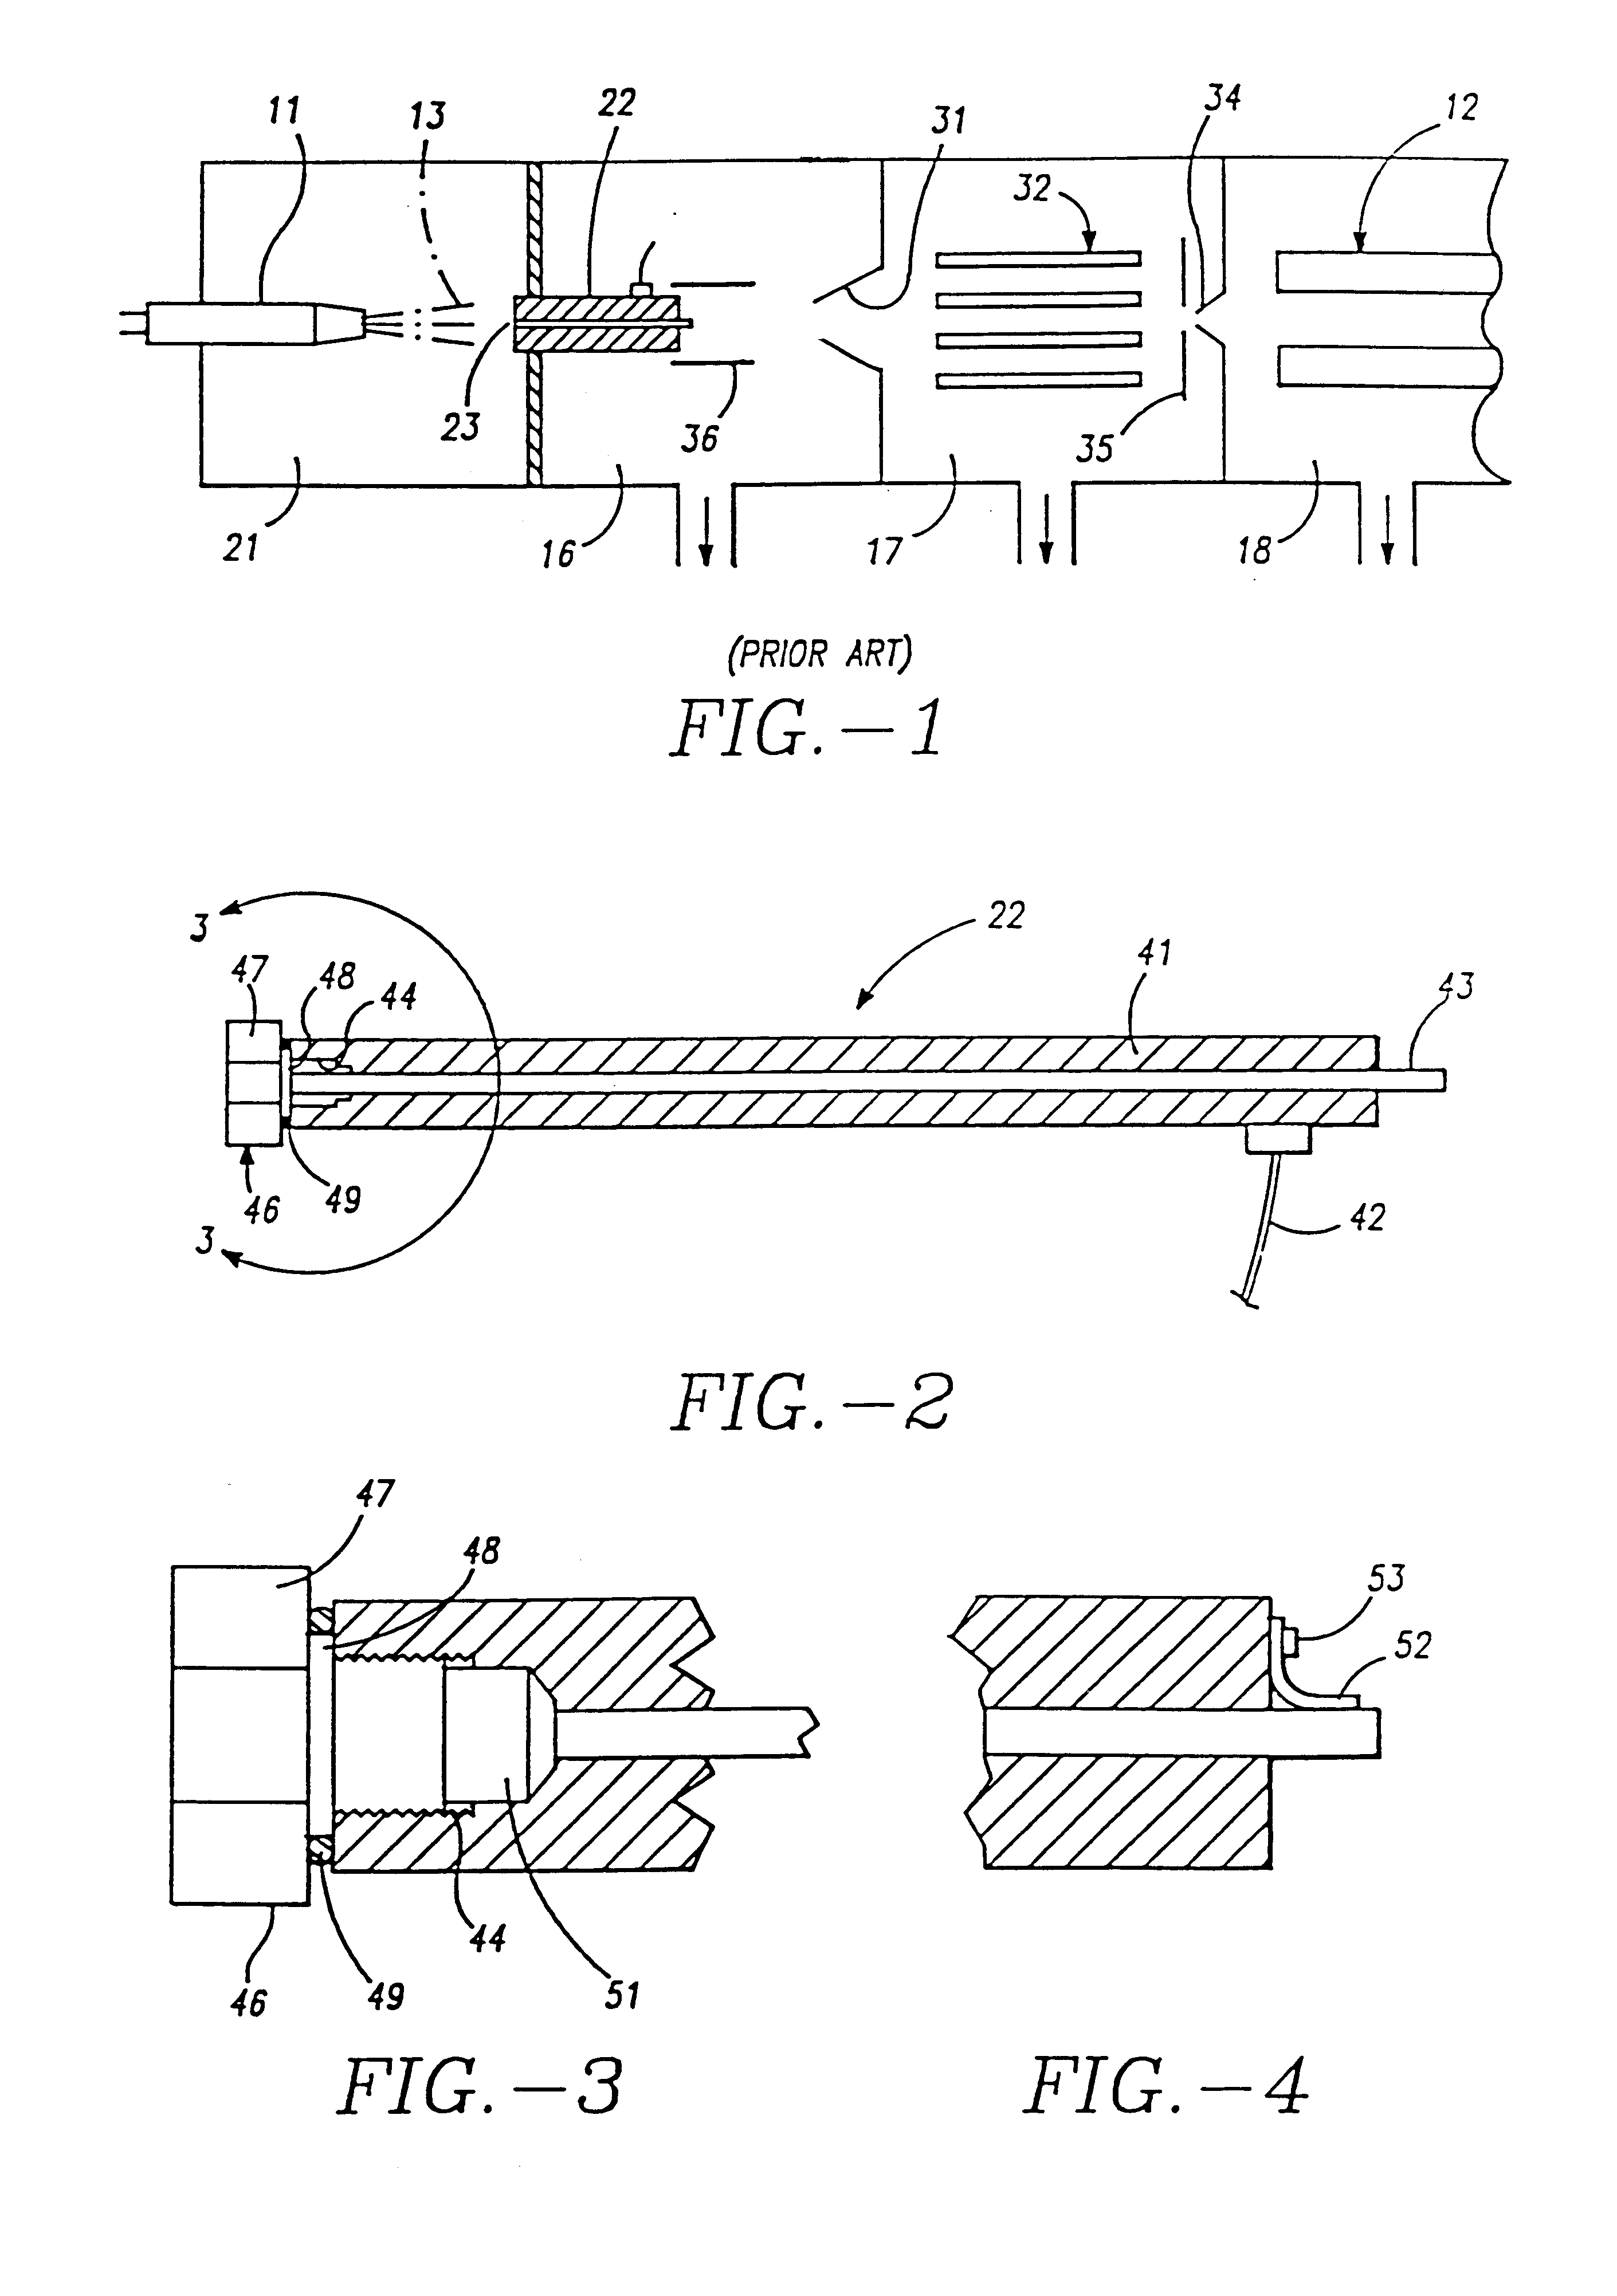 Capillary tube assembly with replaceable capillary tube